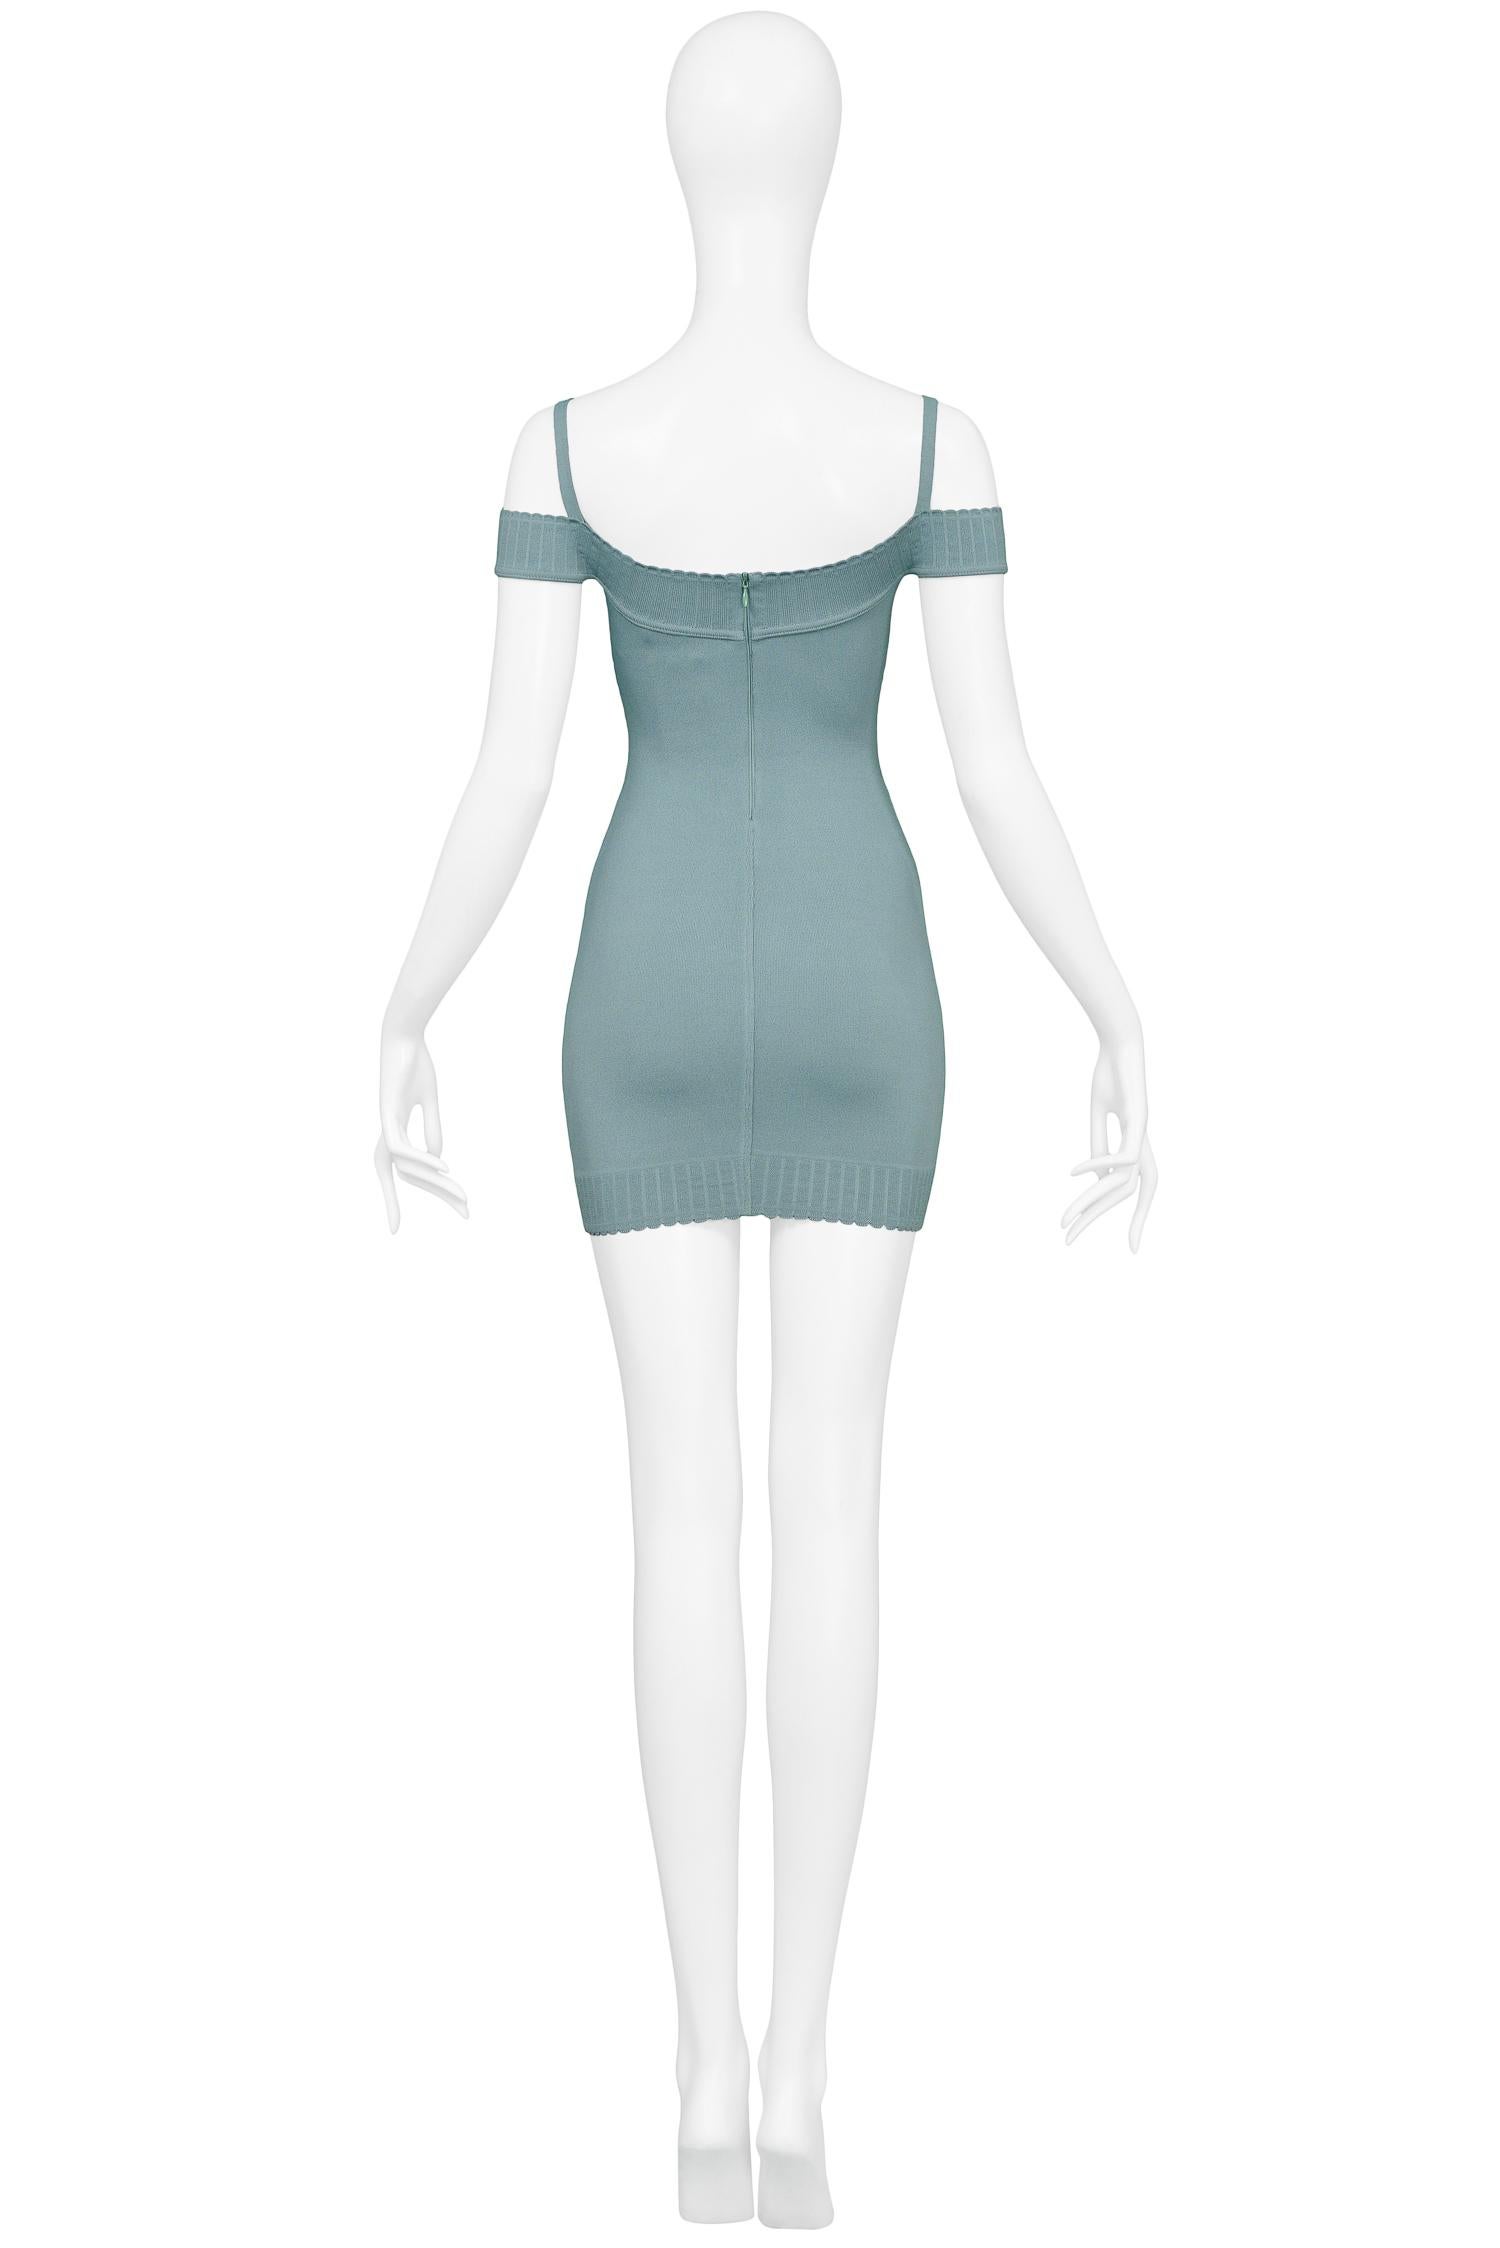 Vintage Azzedine Alaia seafoam green off the shoulder bodycon knit dress with knit strap detail. From the 1992 Collection.

Excellent Condition; New with Tags.

Size: XS